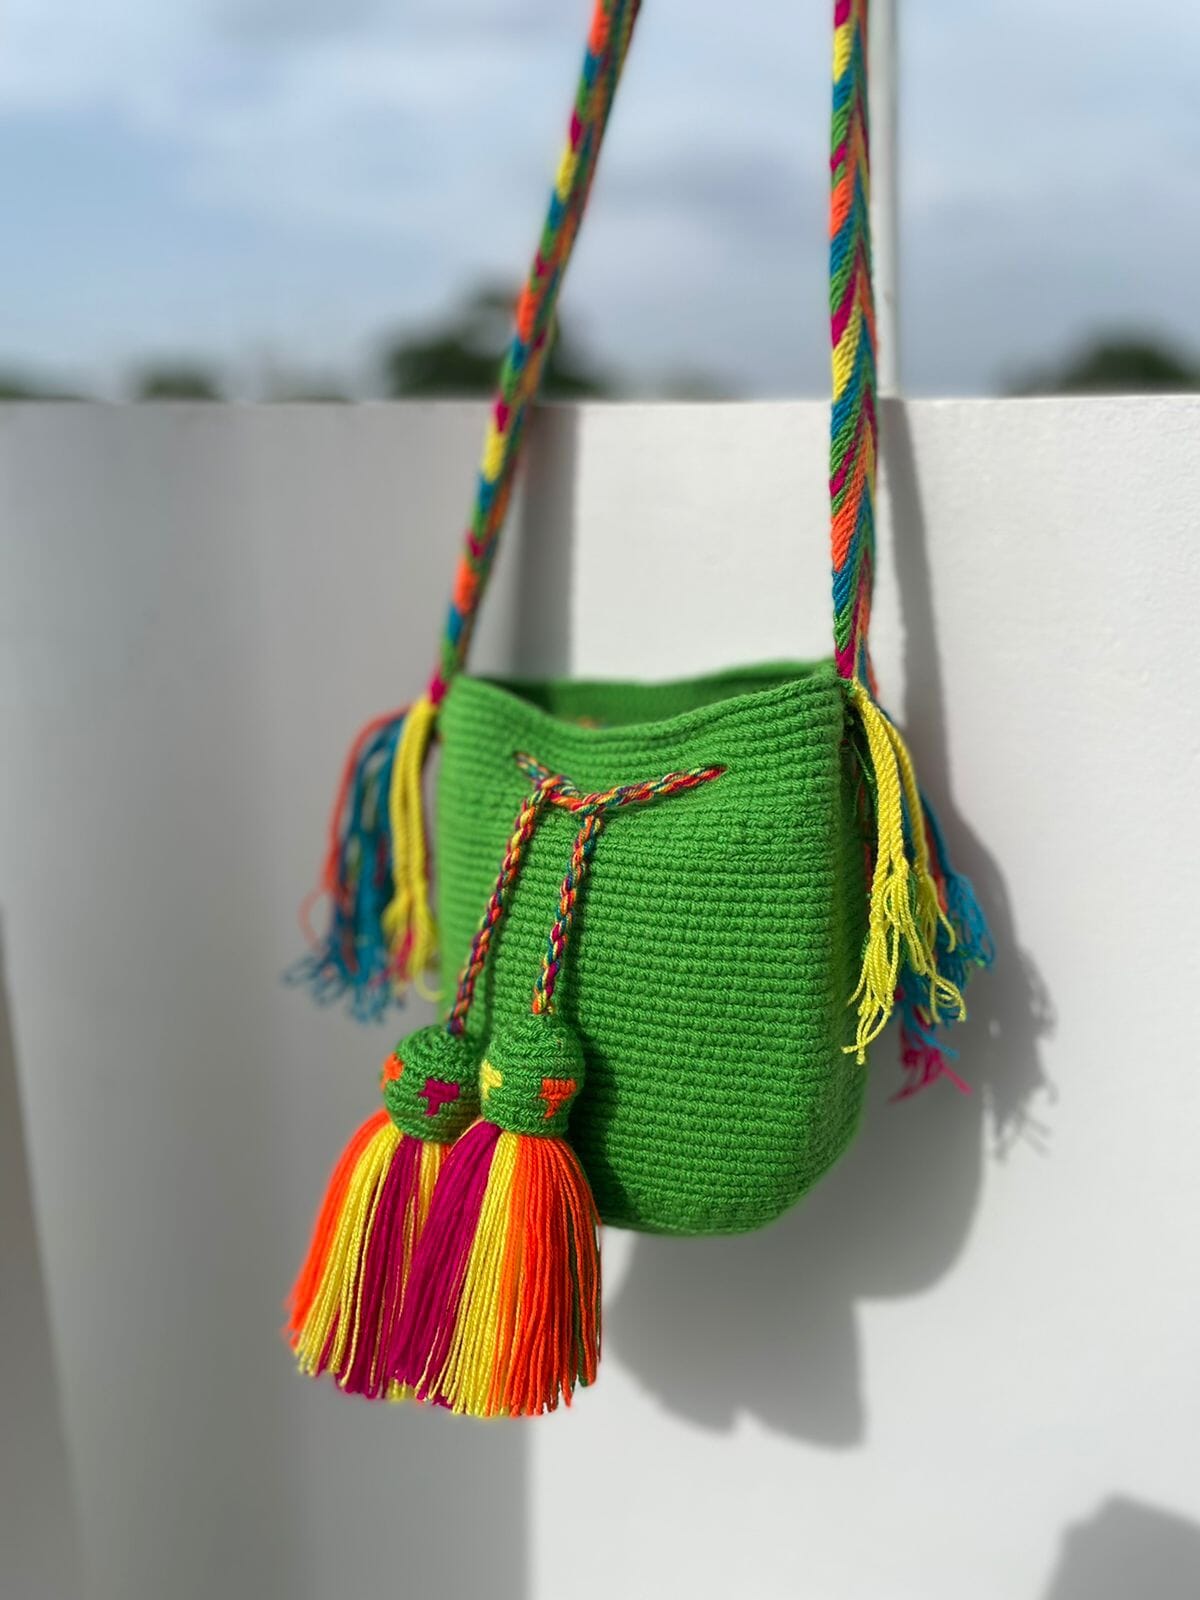 Neon Green Beach Bag for summer | Small Cute Bag for girls | Colorful 4U